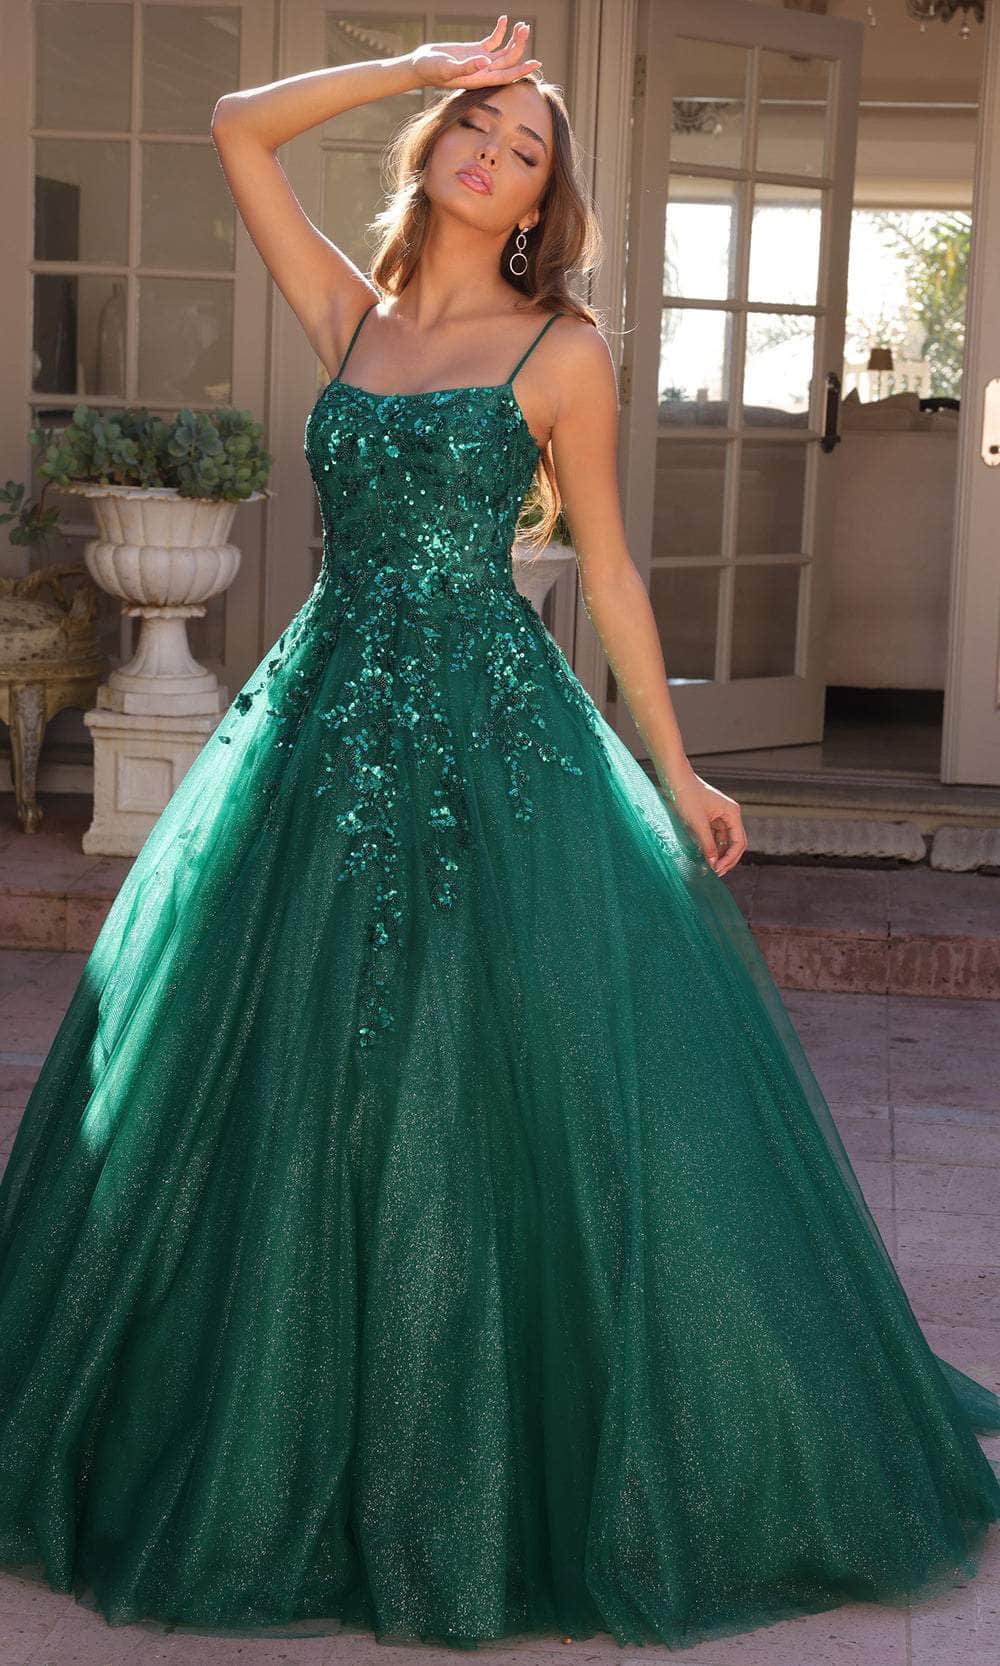 Nox Anabel H1464 - Glitter A-Line Prom Dress Special Occasion Dress 0 / Hunter Green